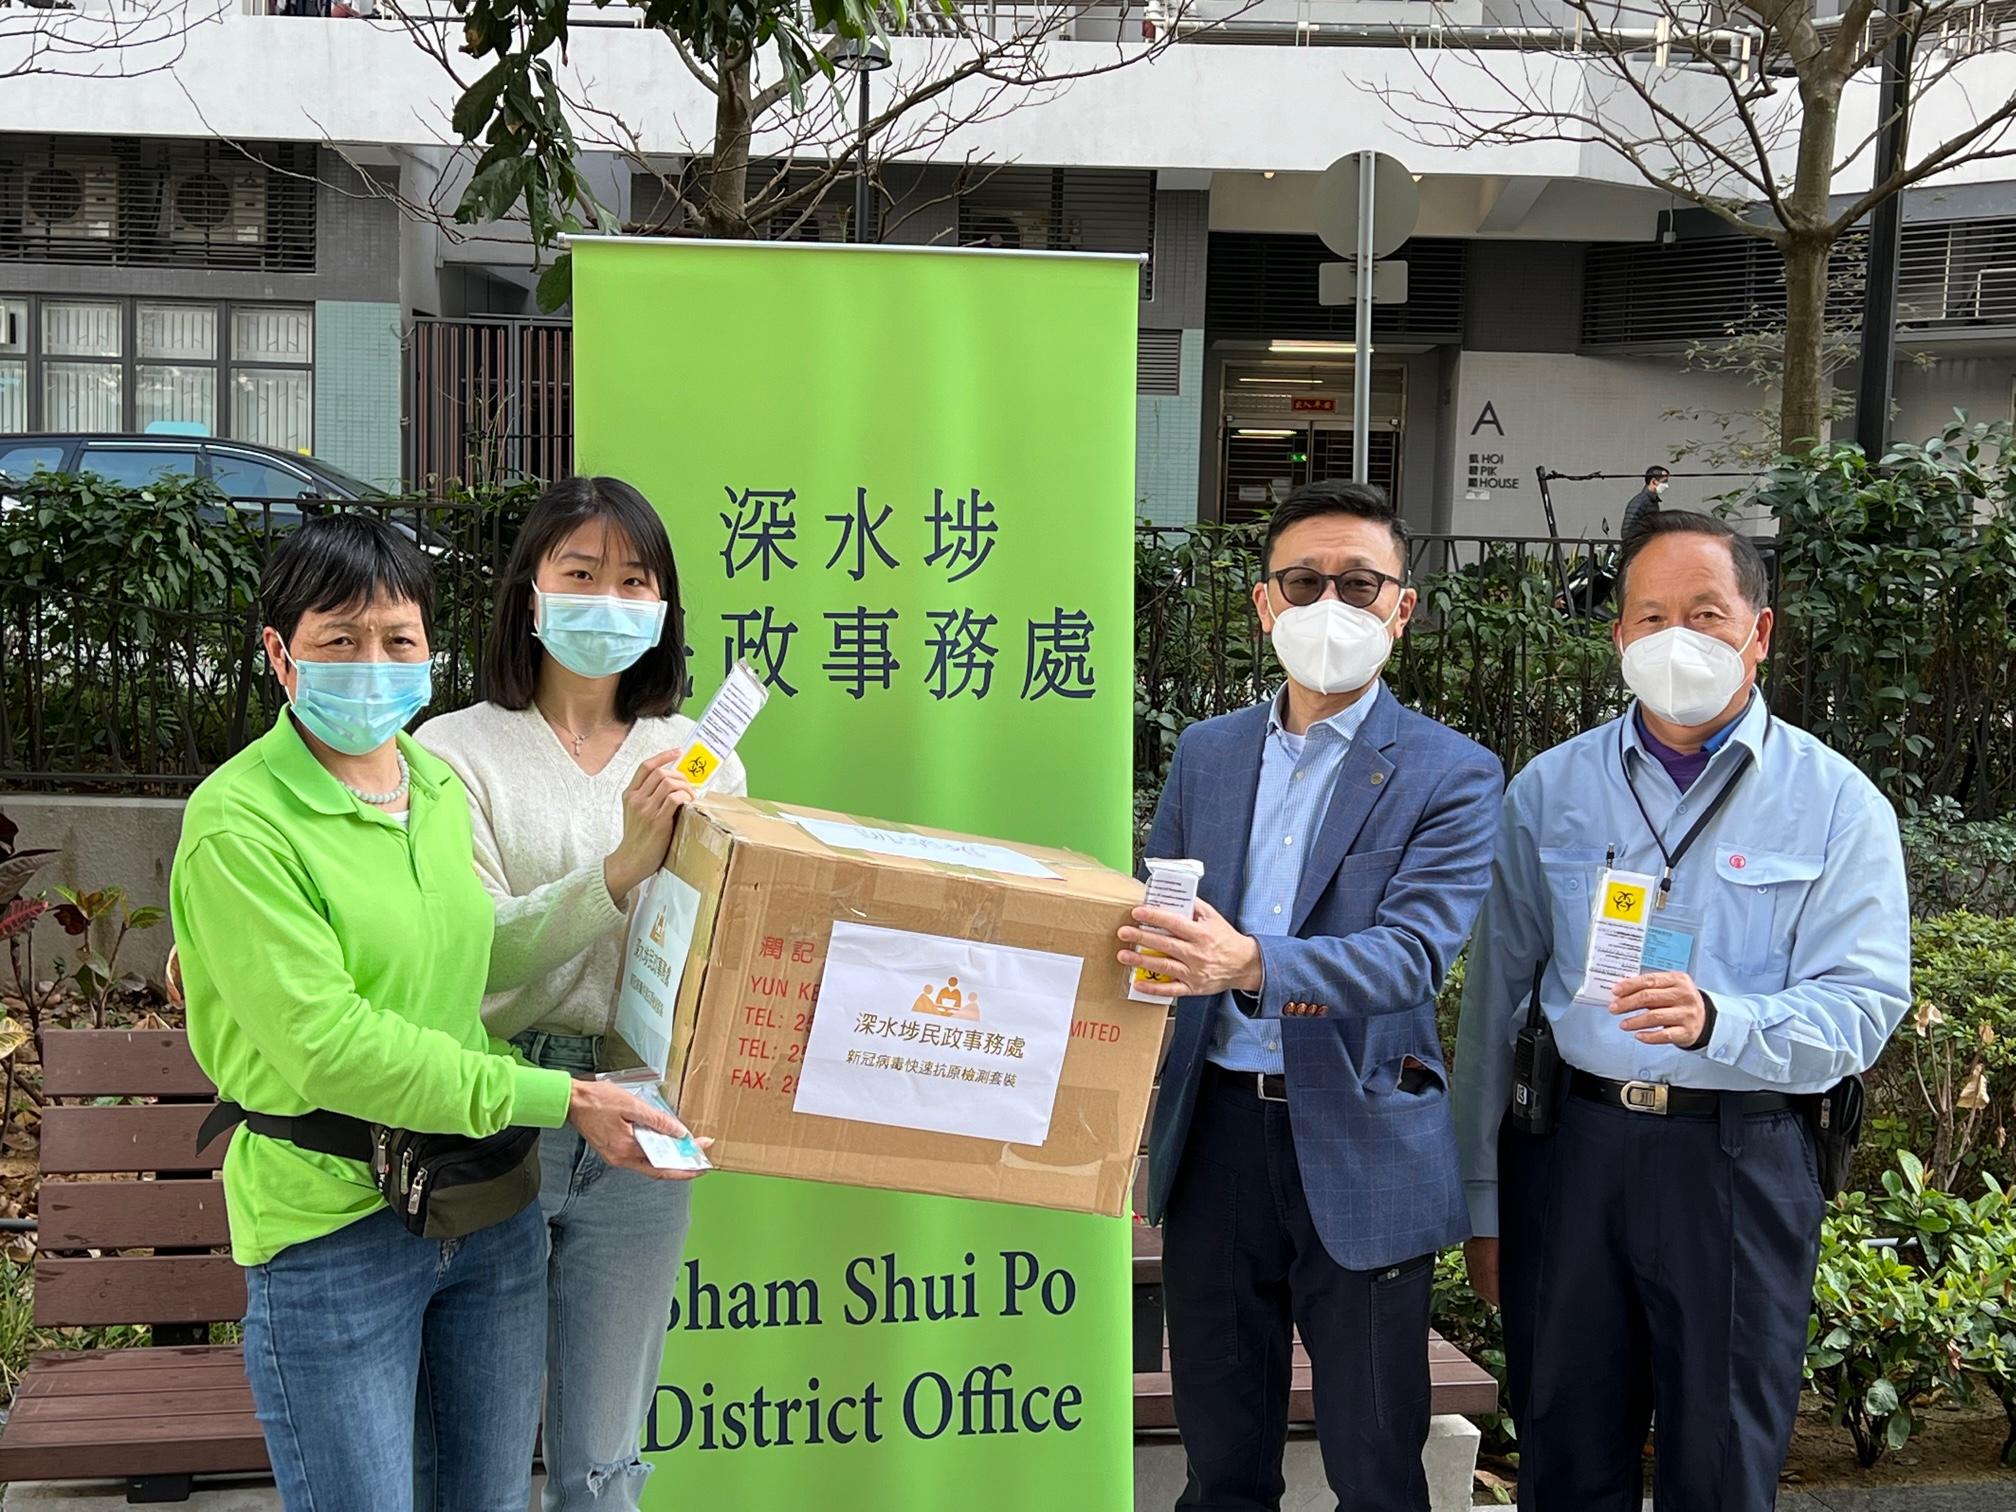 The Sham Shui Po District Office today (February 15) distributed COVID-19 rapid test kits to cleansing workers and property management staff working in Hoi Ying Estate and Hoi Lok Court for voluntary testing through property management companies.